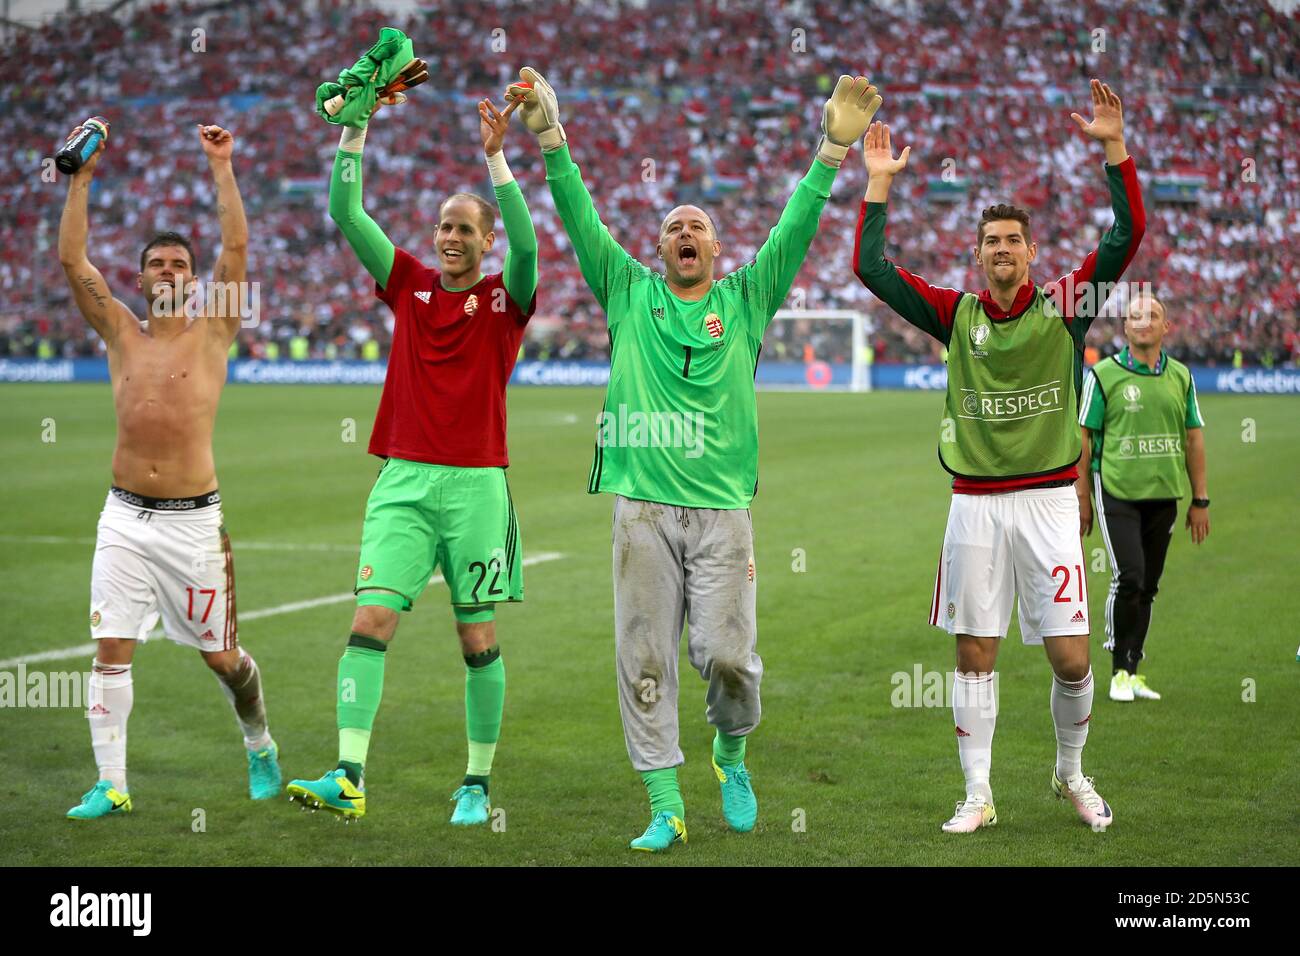 Hungary's Nemanja Nikolic, goalkeeper Peter Gulacsi, goalkeeper Gabor Kiraly and Barnabas Bese (left to right) celebrate in front of their fans after the final whistle  Stock Photo